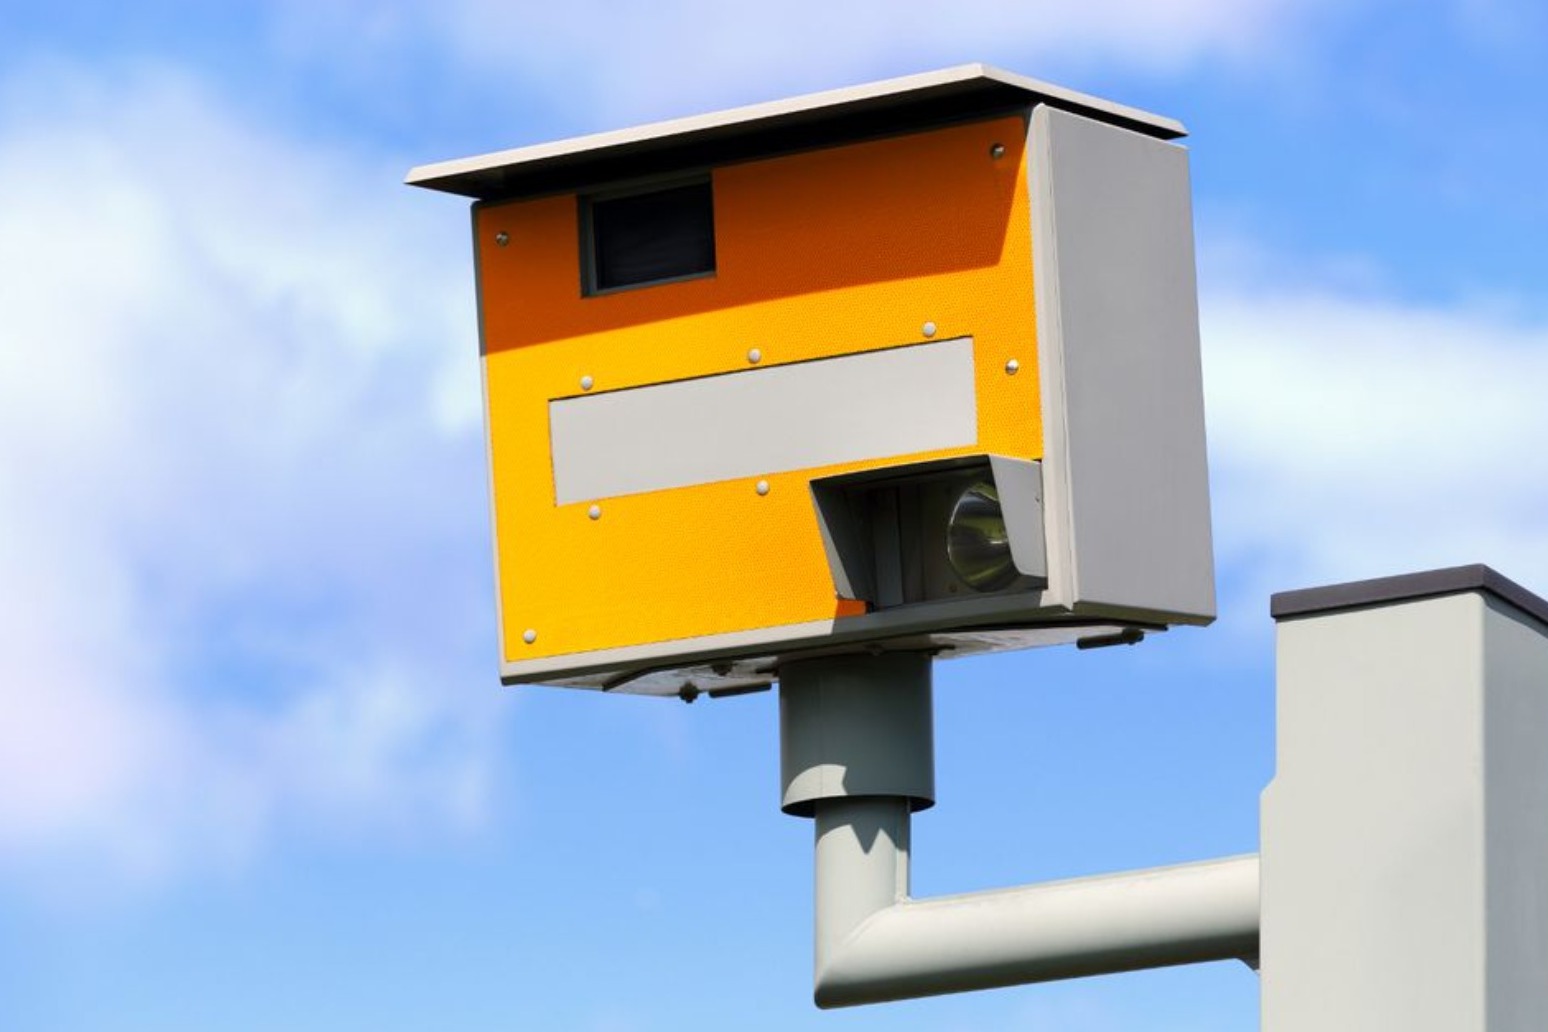 Vast Majority Of Motorists Want Speed Cameras To Check Tax Insurance 